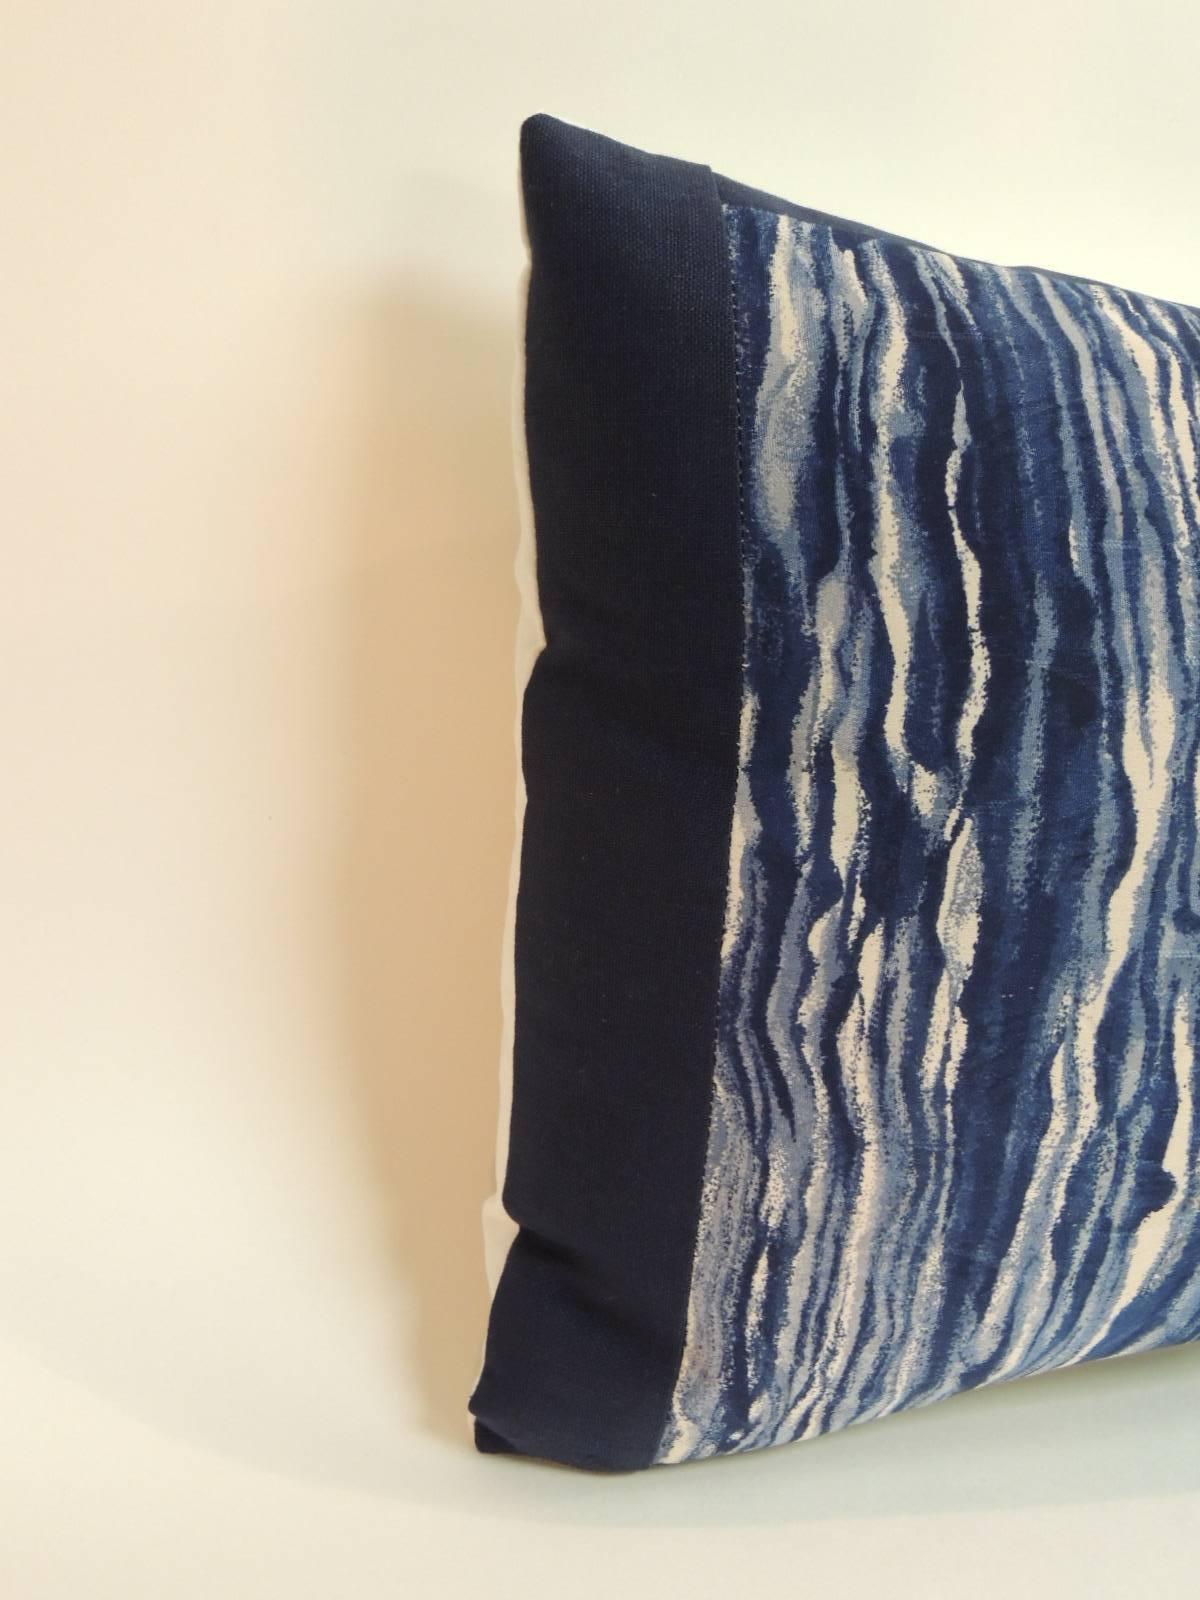 Vintage Indigo and natural Japanese Shibori silk lumbar pillow marbleized pattern in shades of indigo, blue, light blue and natural. Framed with royal blue linen and white cotton backing. handcrafted and designed in the USA. Closure by stitch (no